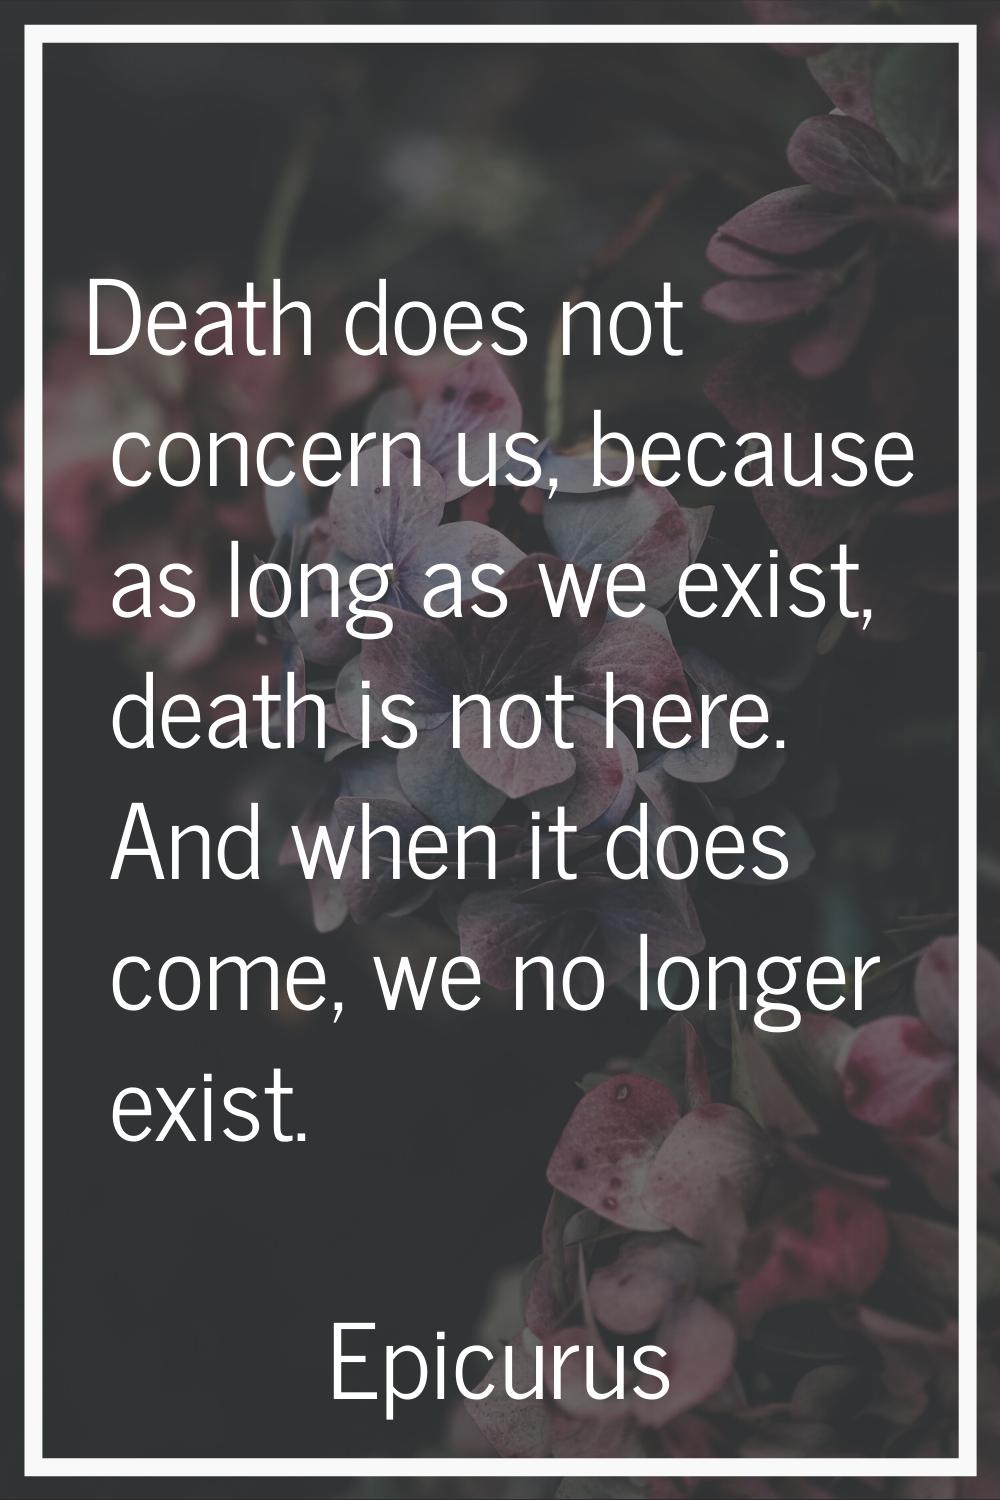 Death does not concern us, because as long as we exist, death is not here. And when it does come, w